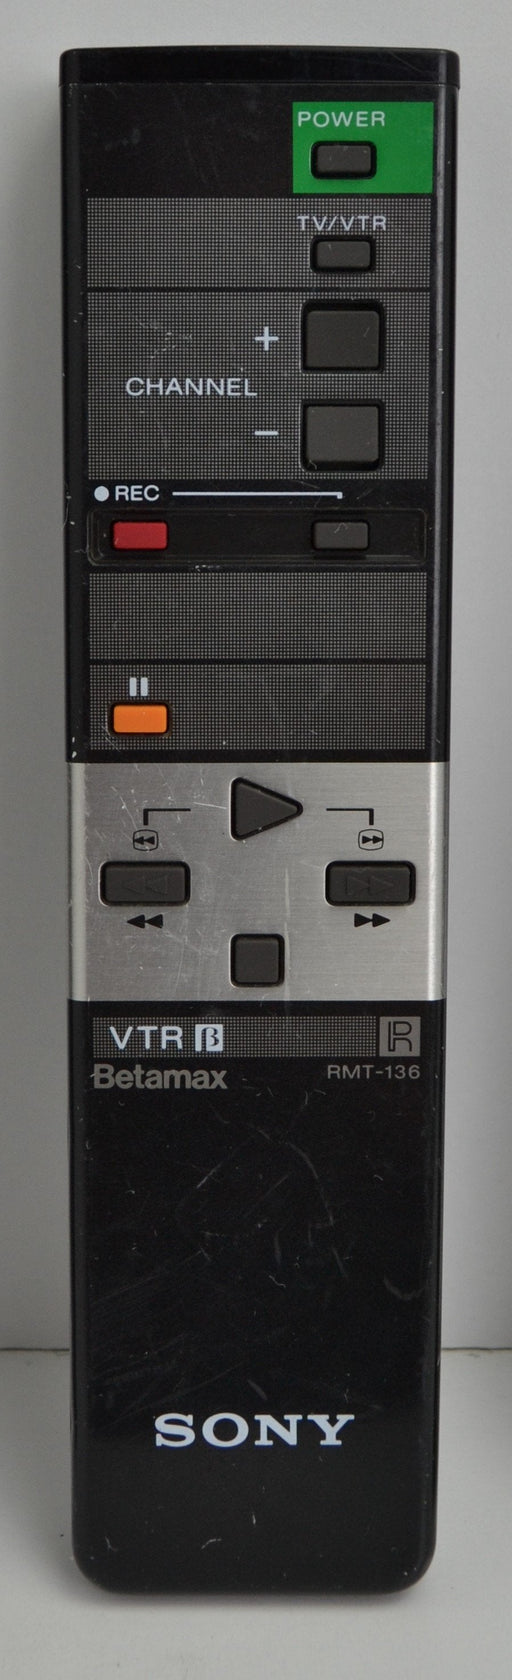 Sony RMT-136 Betamax Video Tape Recorder Player Remote Control-Remote-SpenCertified-refurbished-vintage-electonics